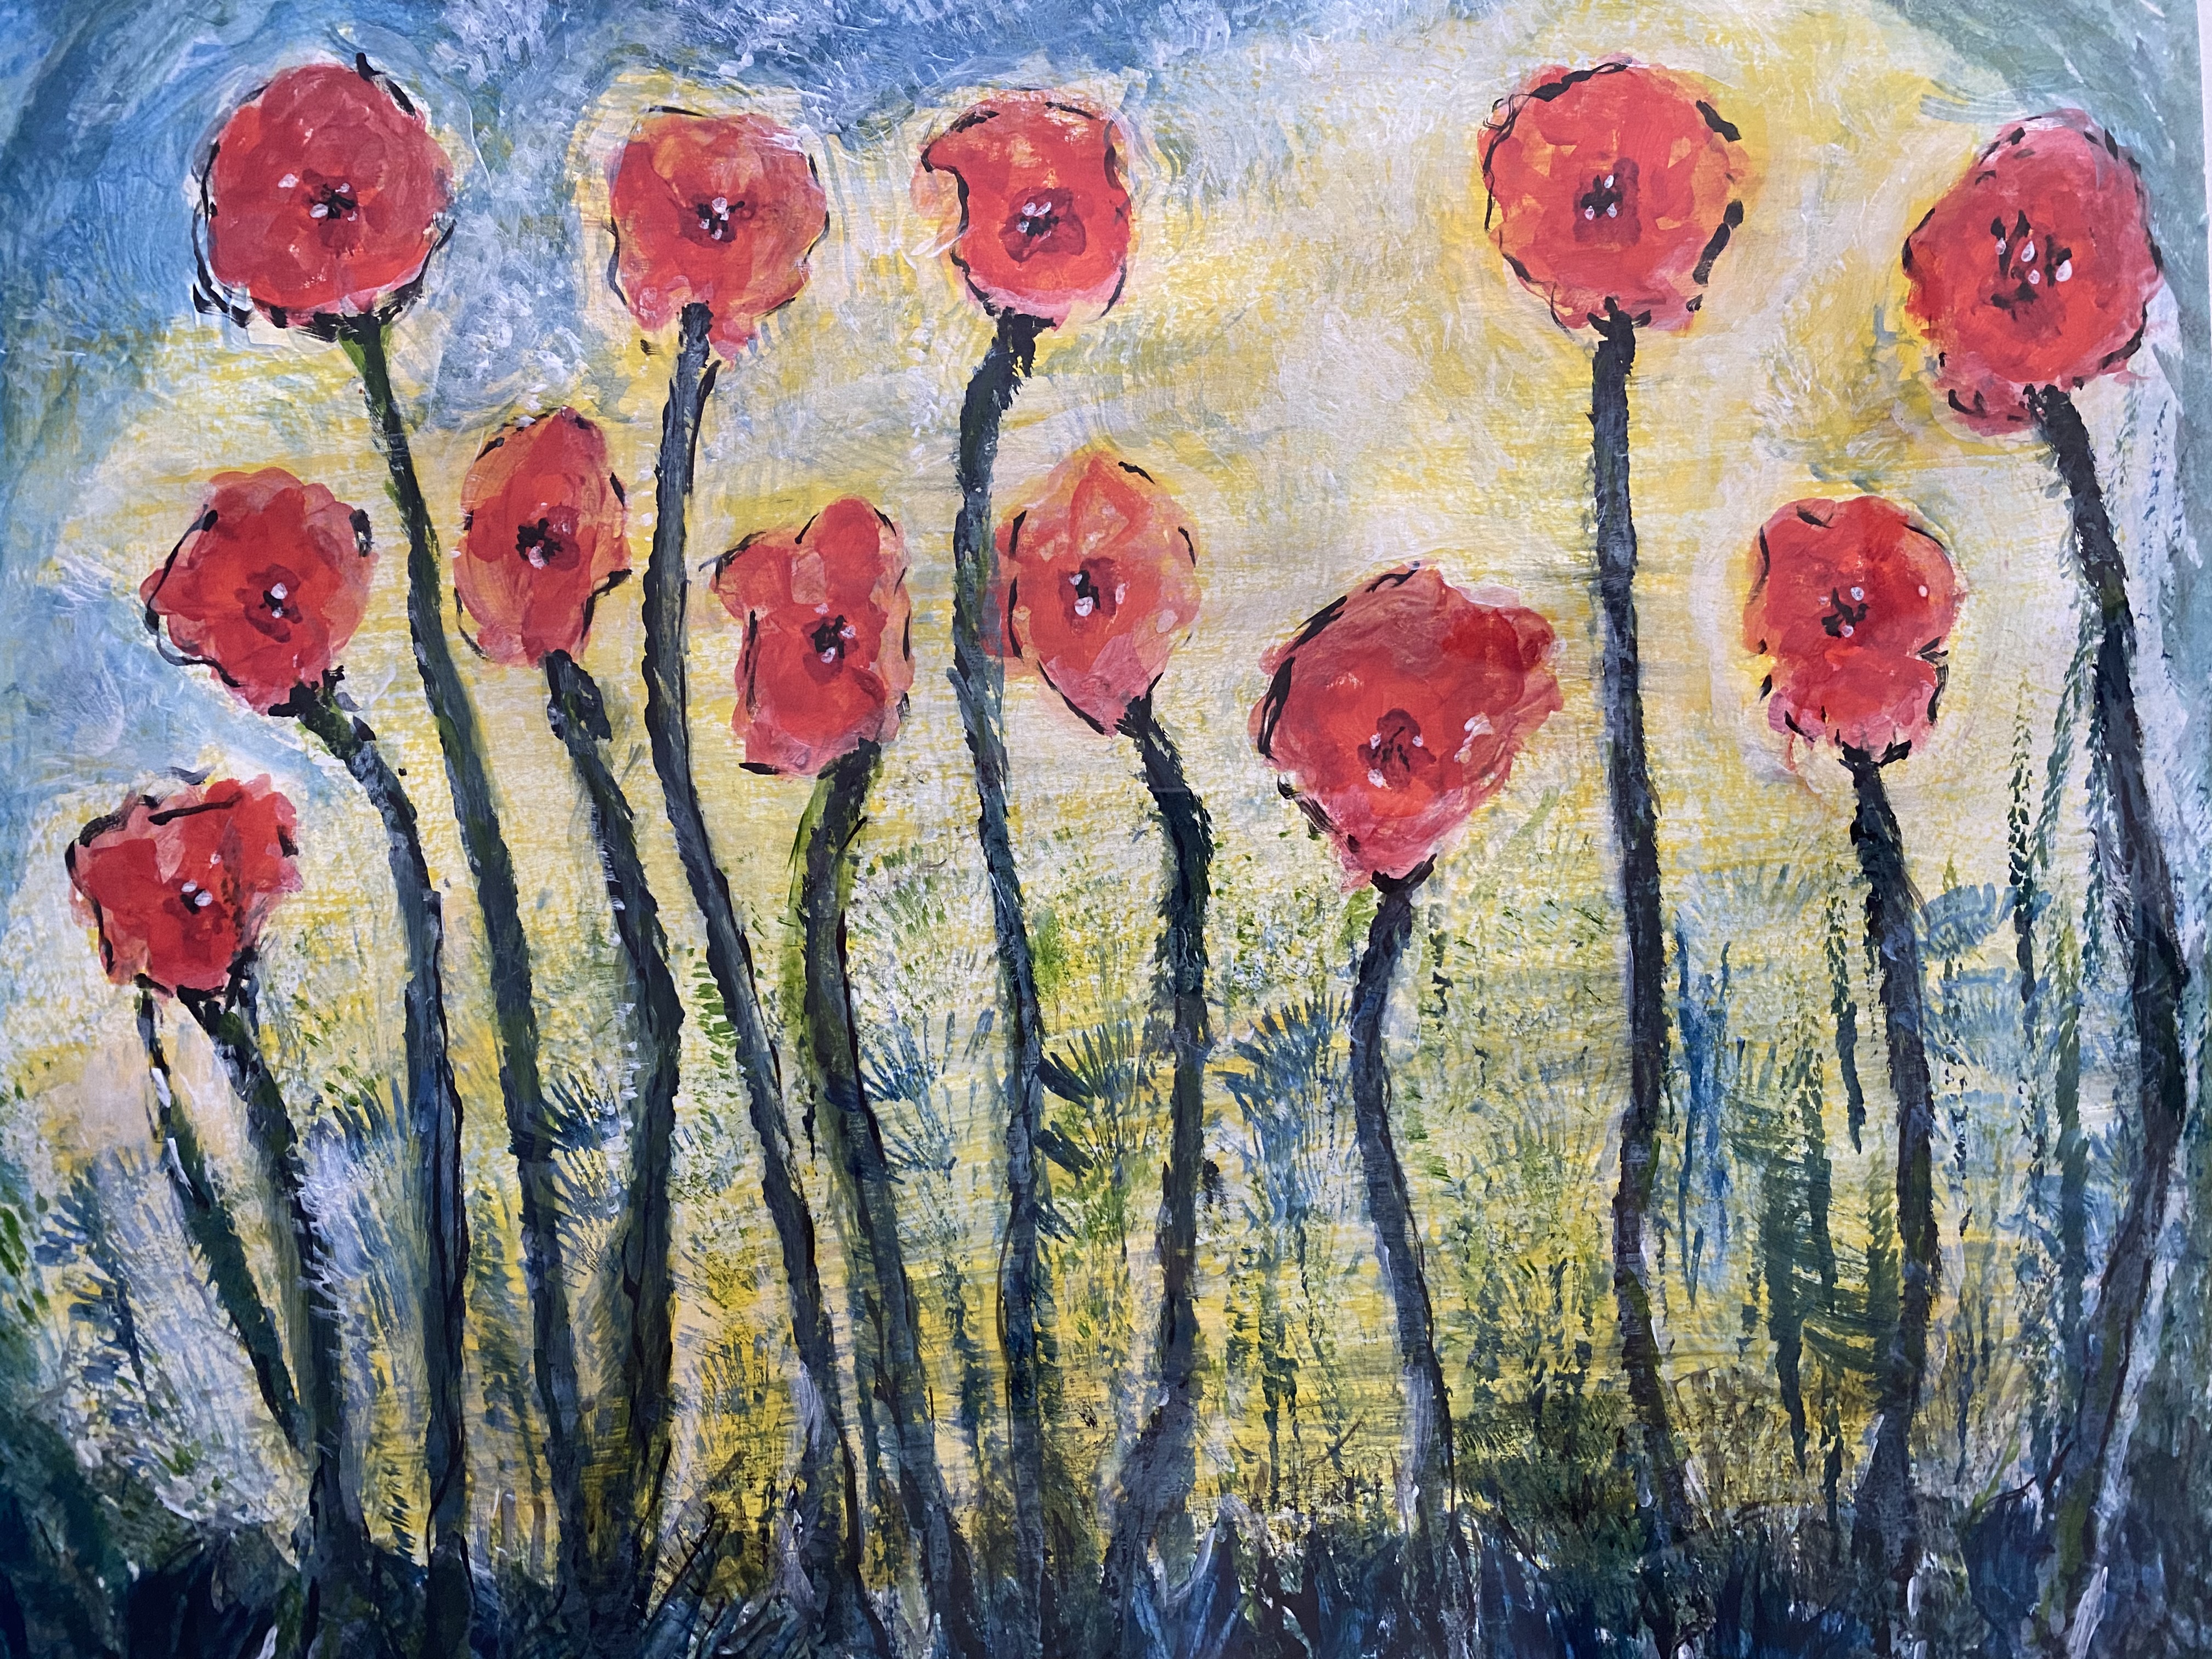 painting of red poppies against a yellow-blue sky with leaves and plants below